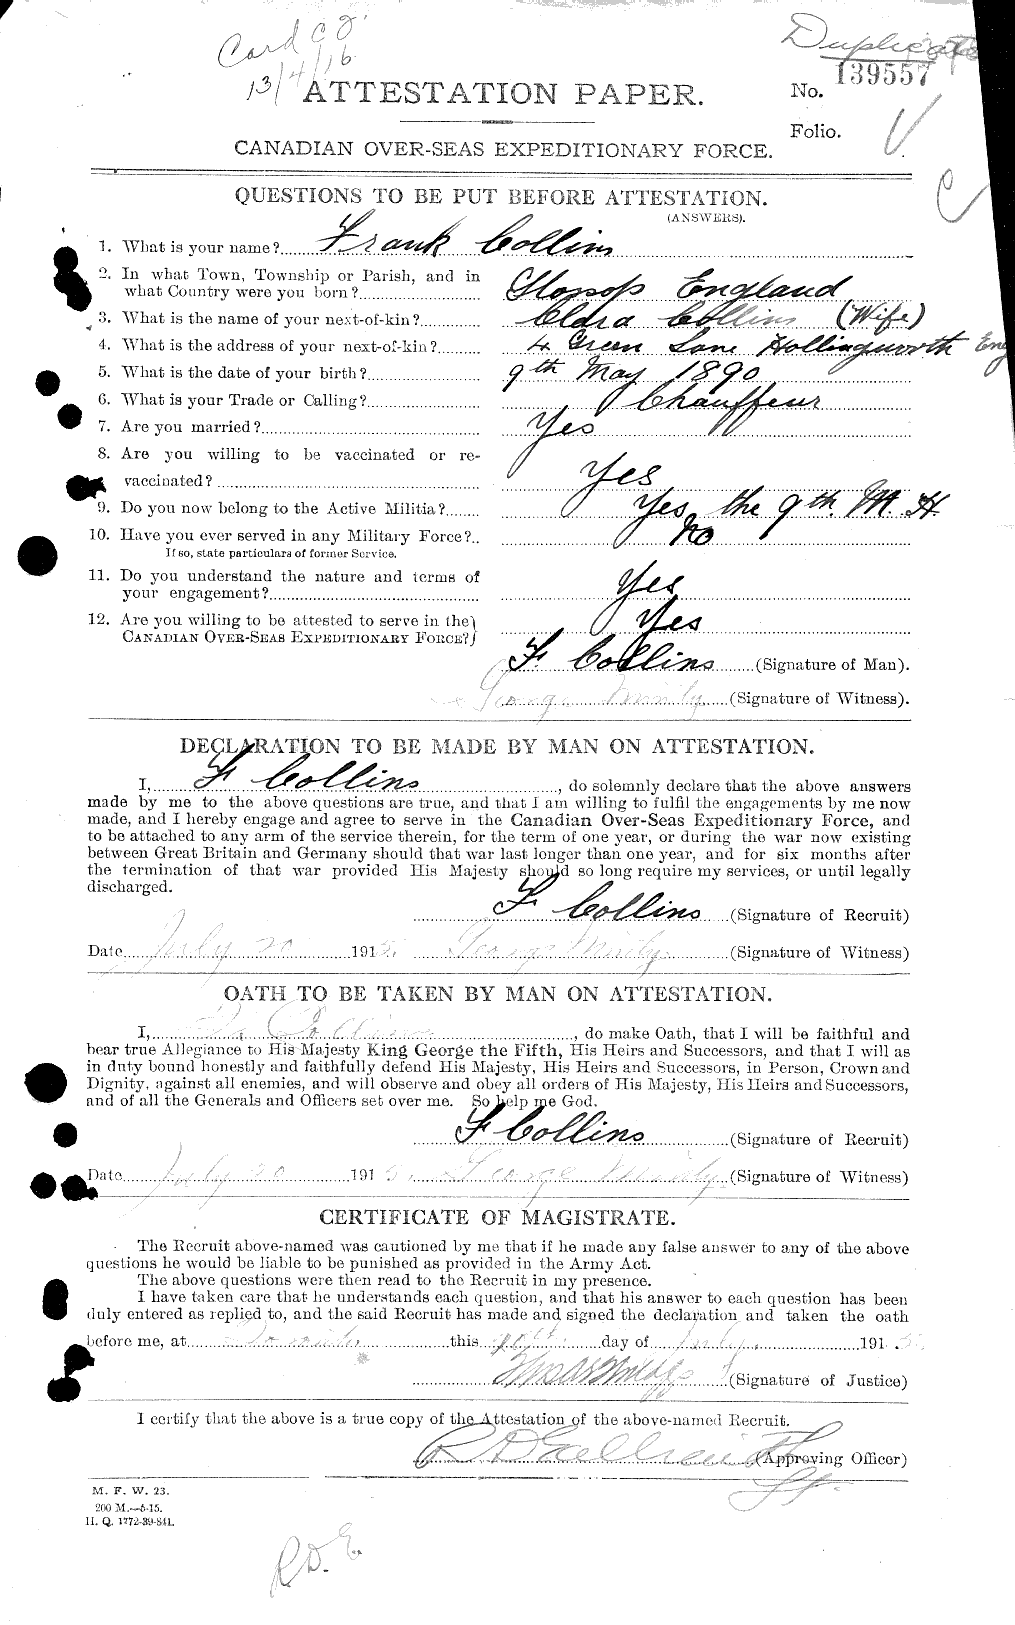 Personnel Records of the First World War - CEF 037783a